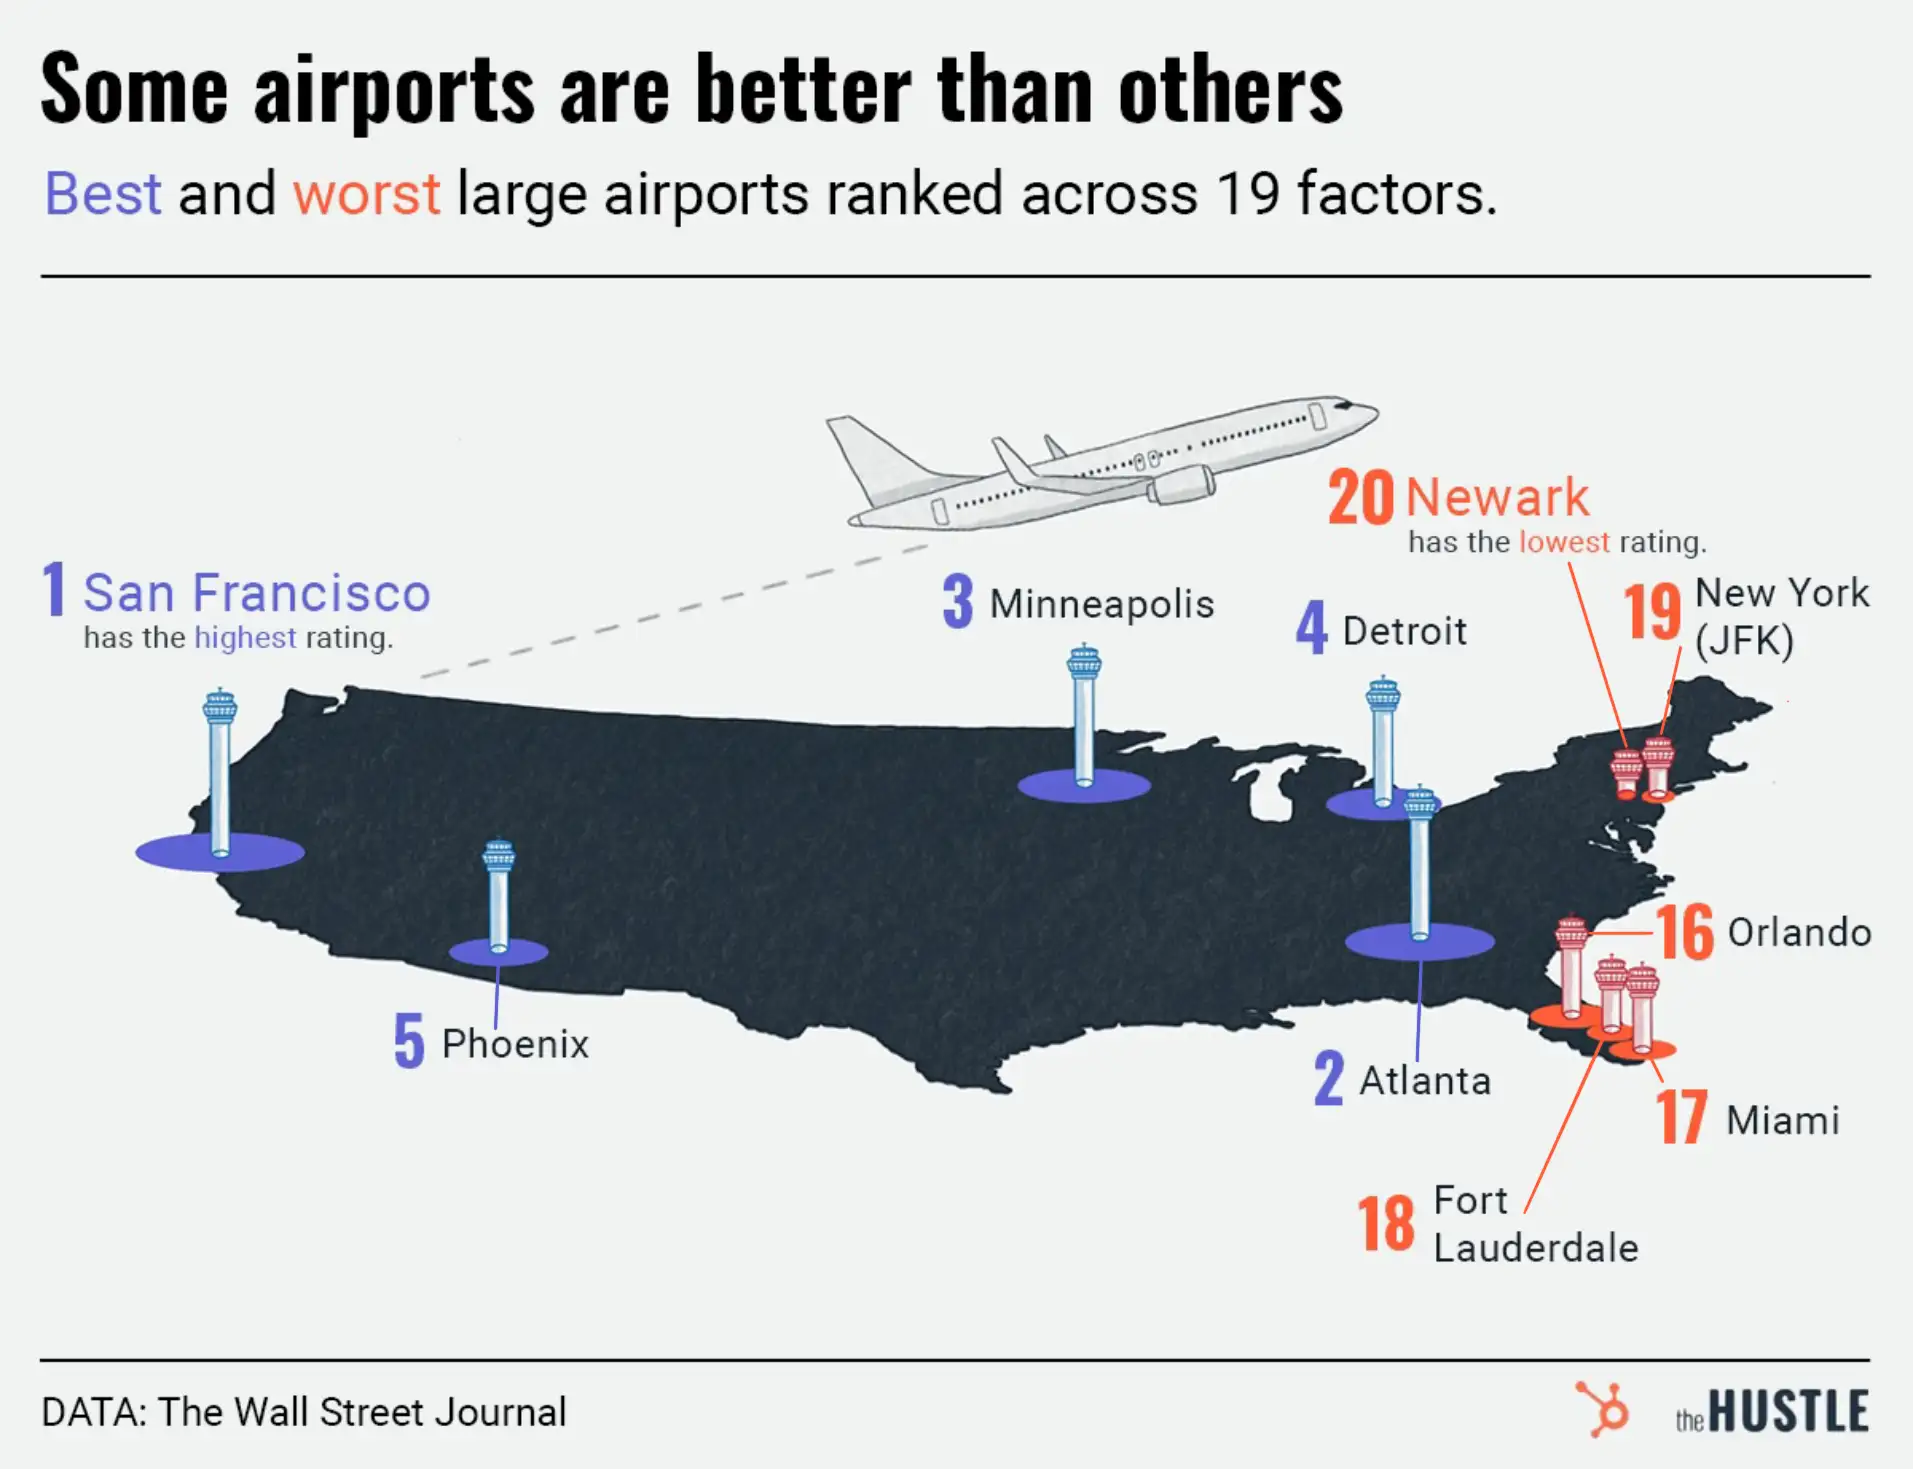 In the battle of airports, the West Coast wins